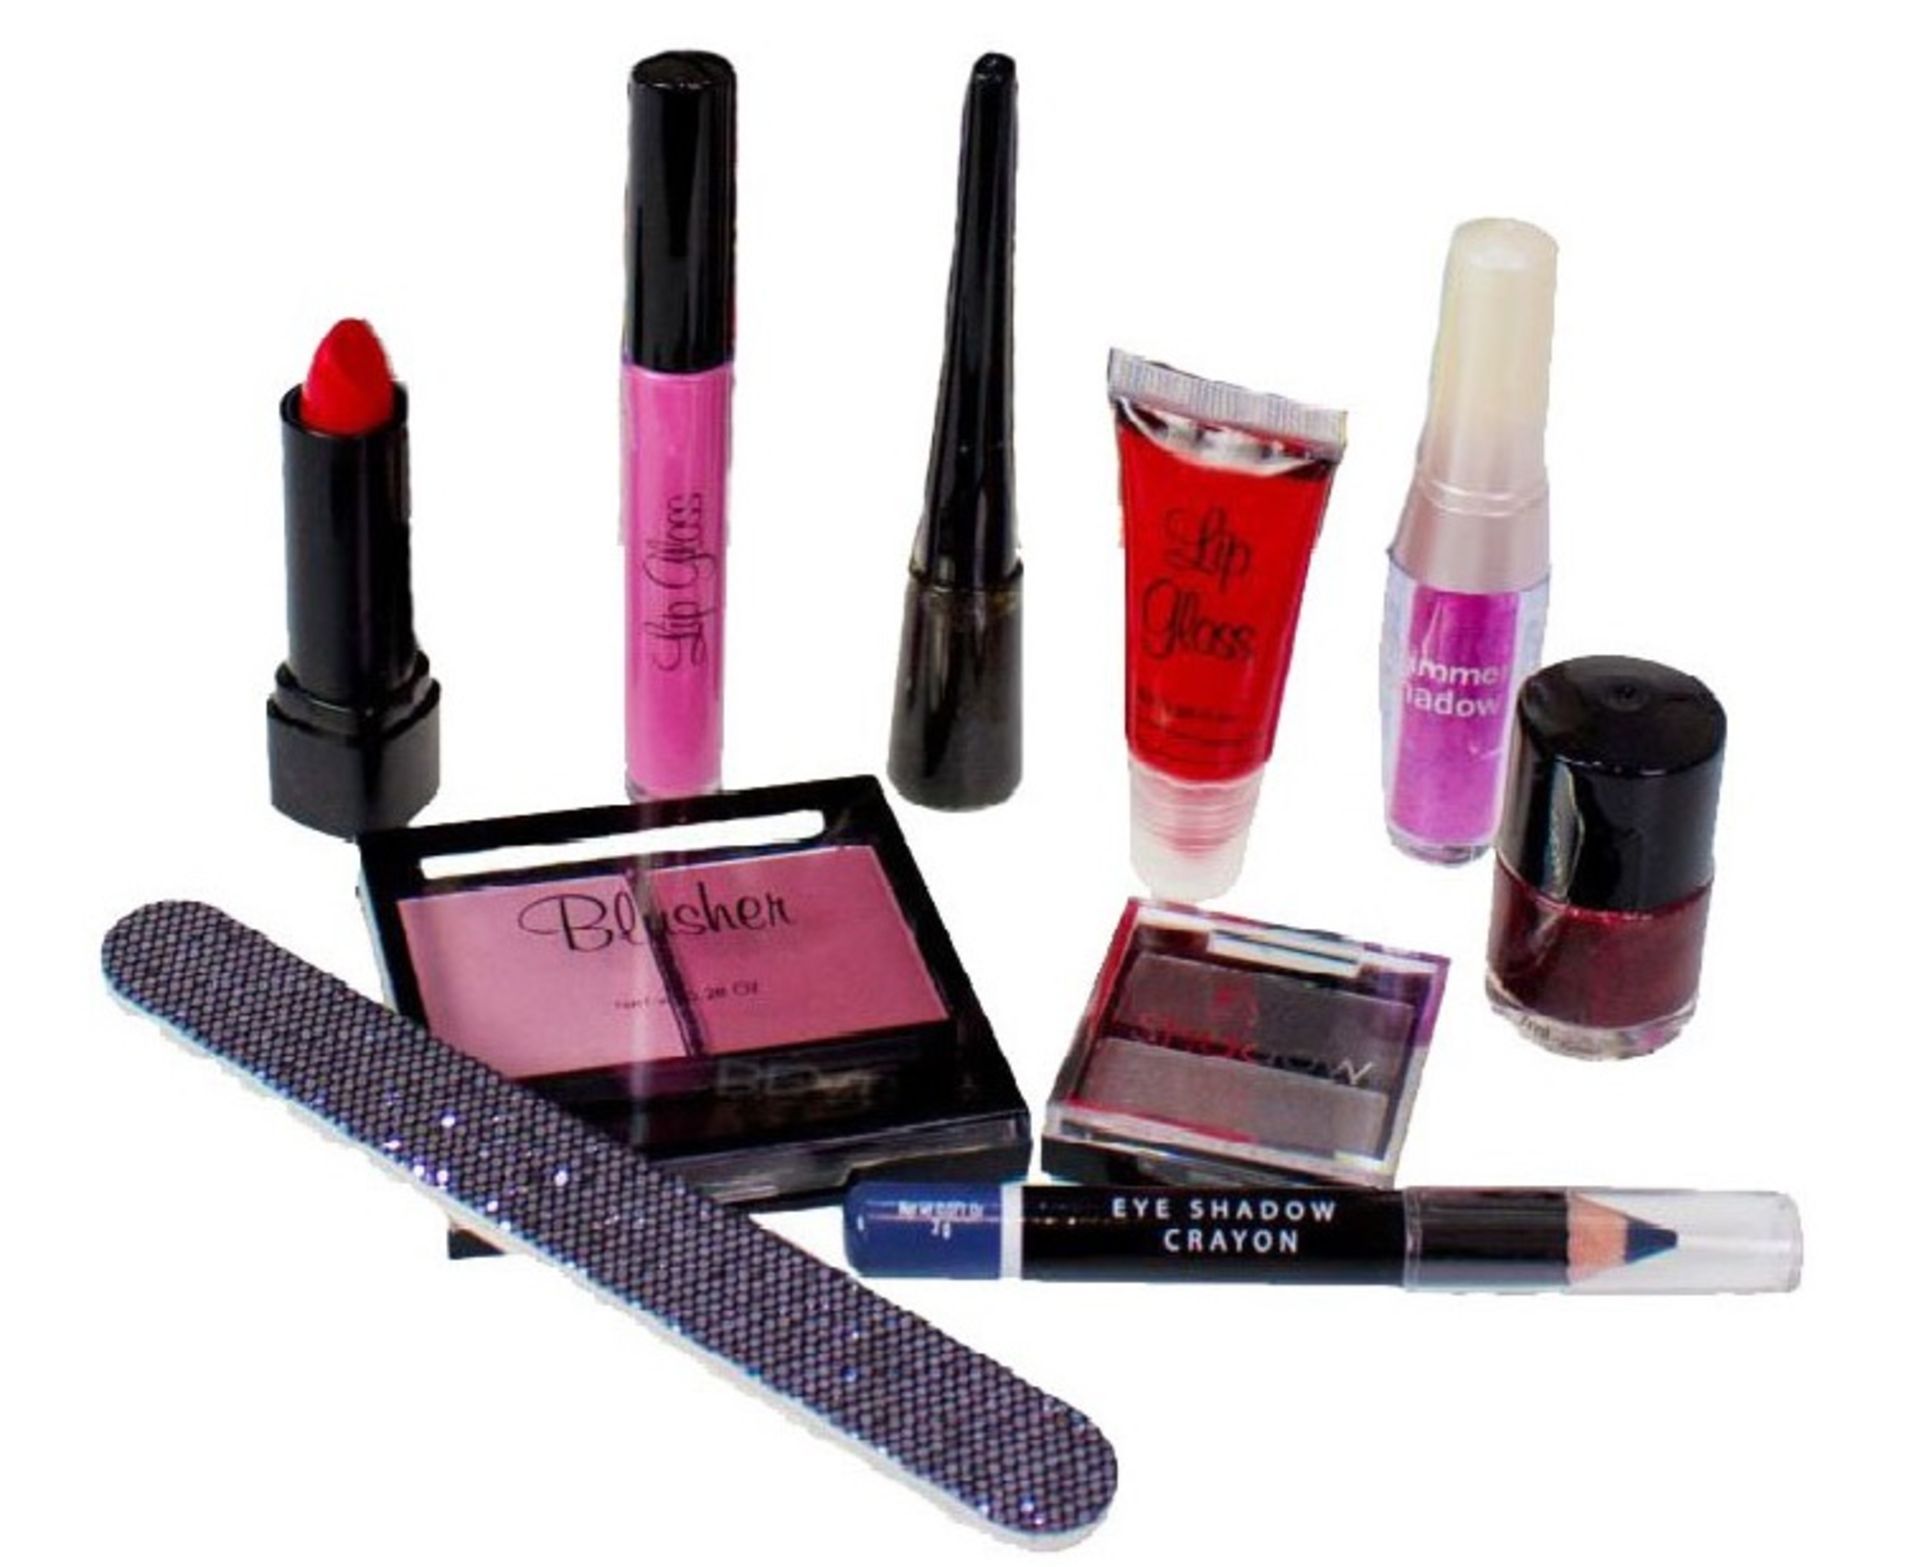 V *TRADE QTY* Brand New Ten Beauty Product Selection in Gift Bag (Contents vary) X100 YOUR BID PRICE